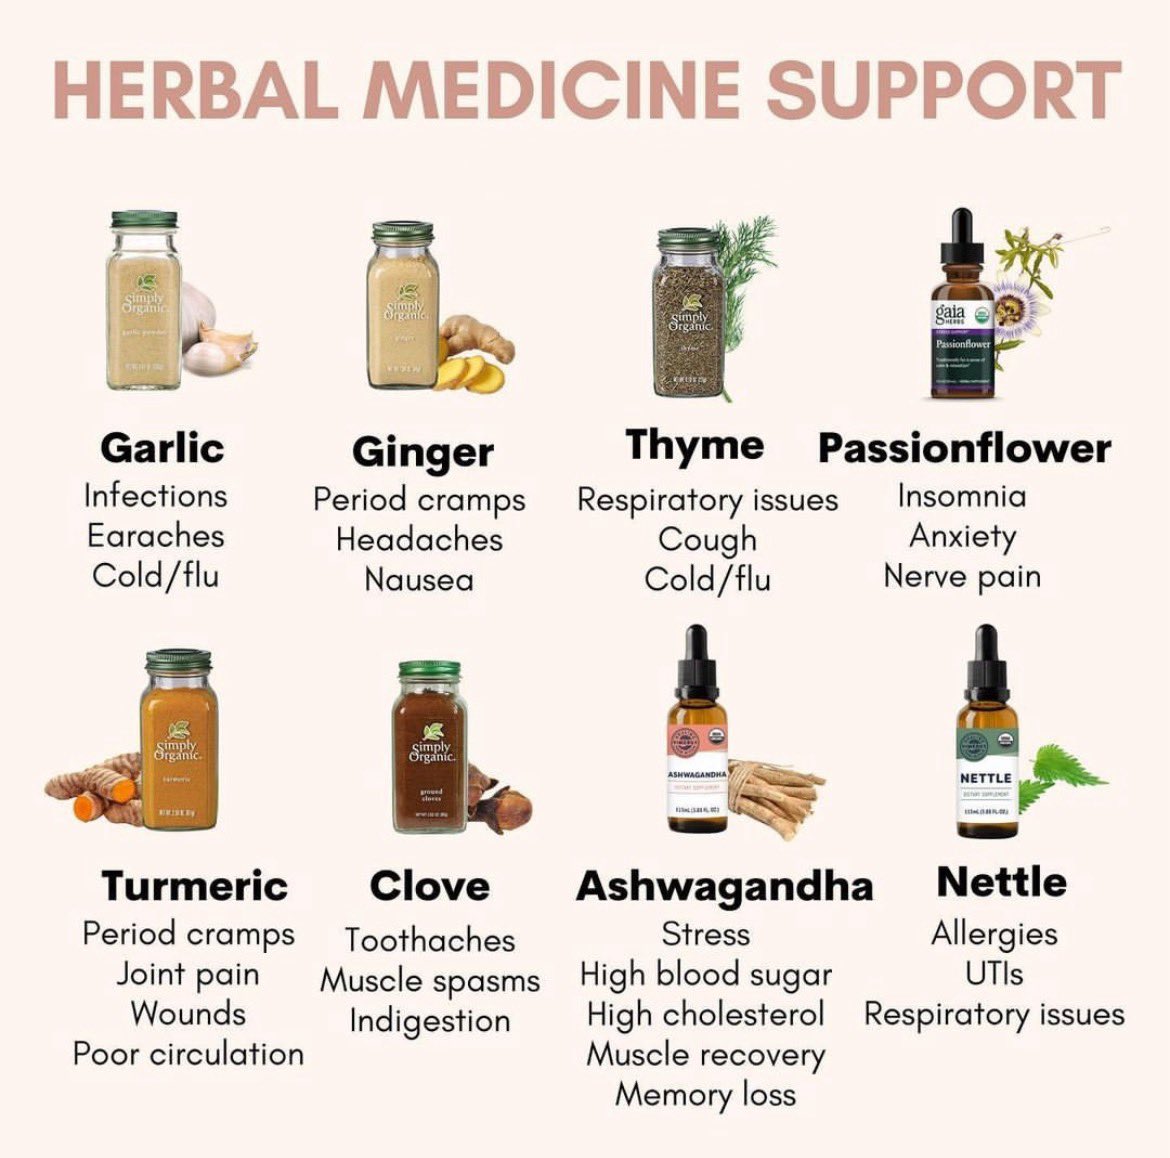 Did you know about these herbal medicines?